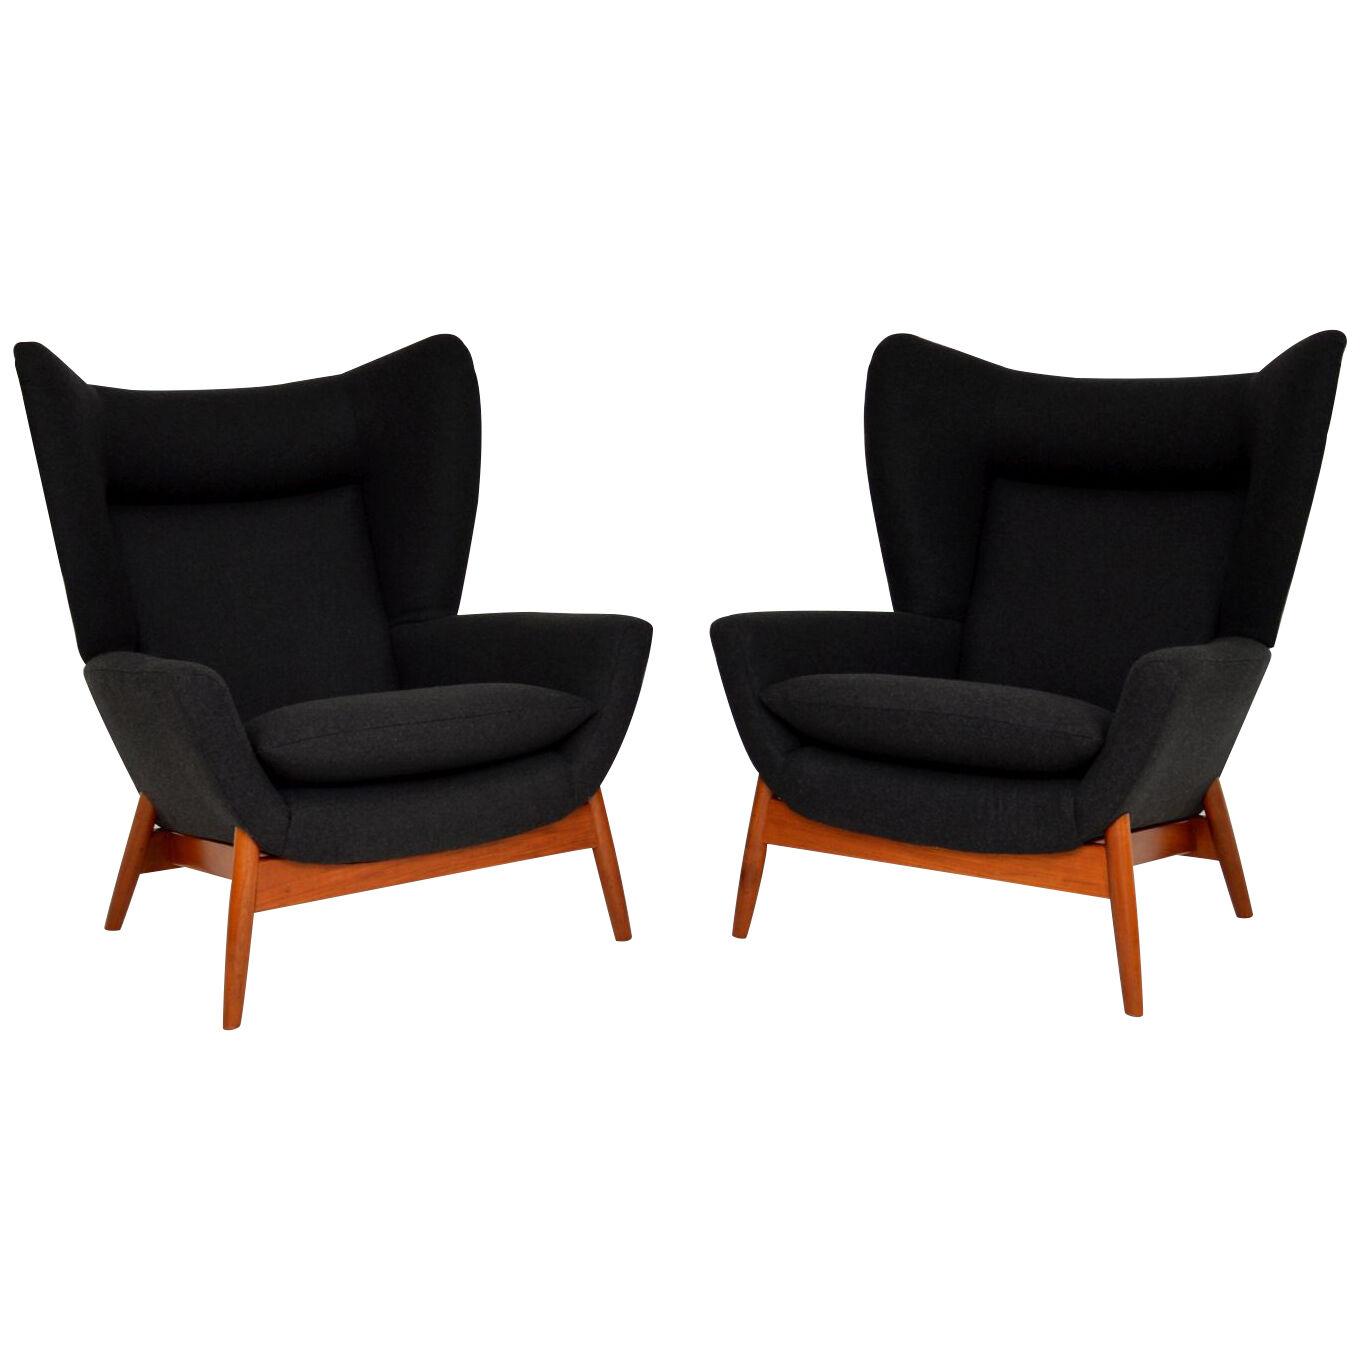 1960's Pair of Parker Knoll 'Merrywood' Armchairs